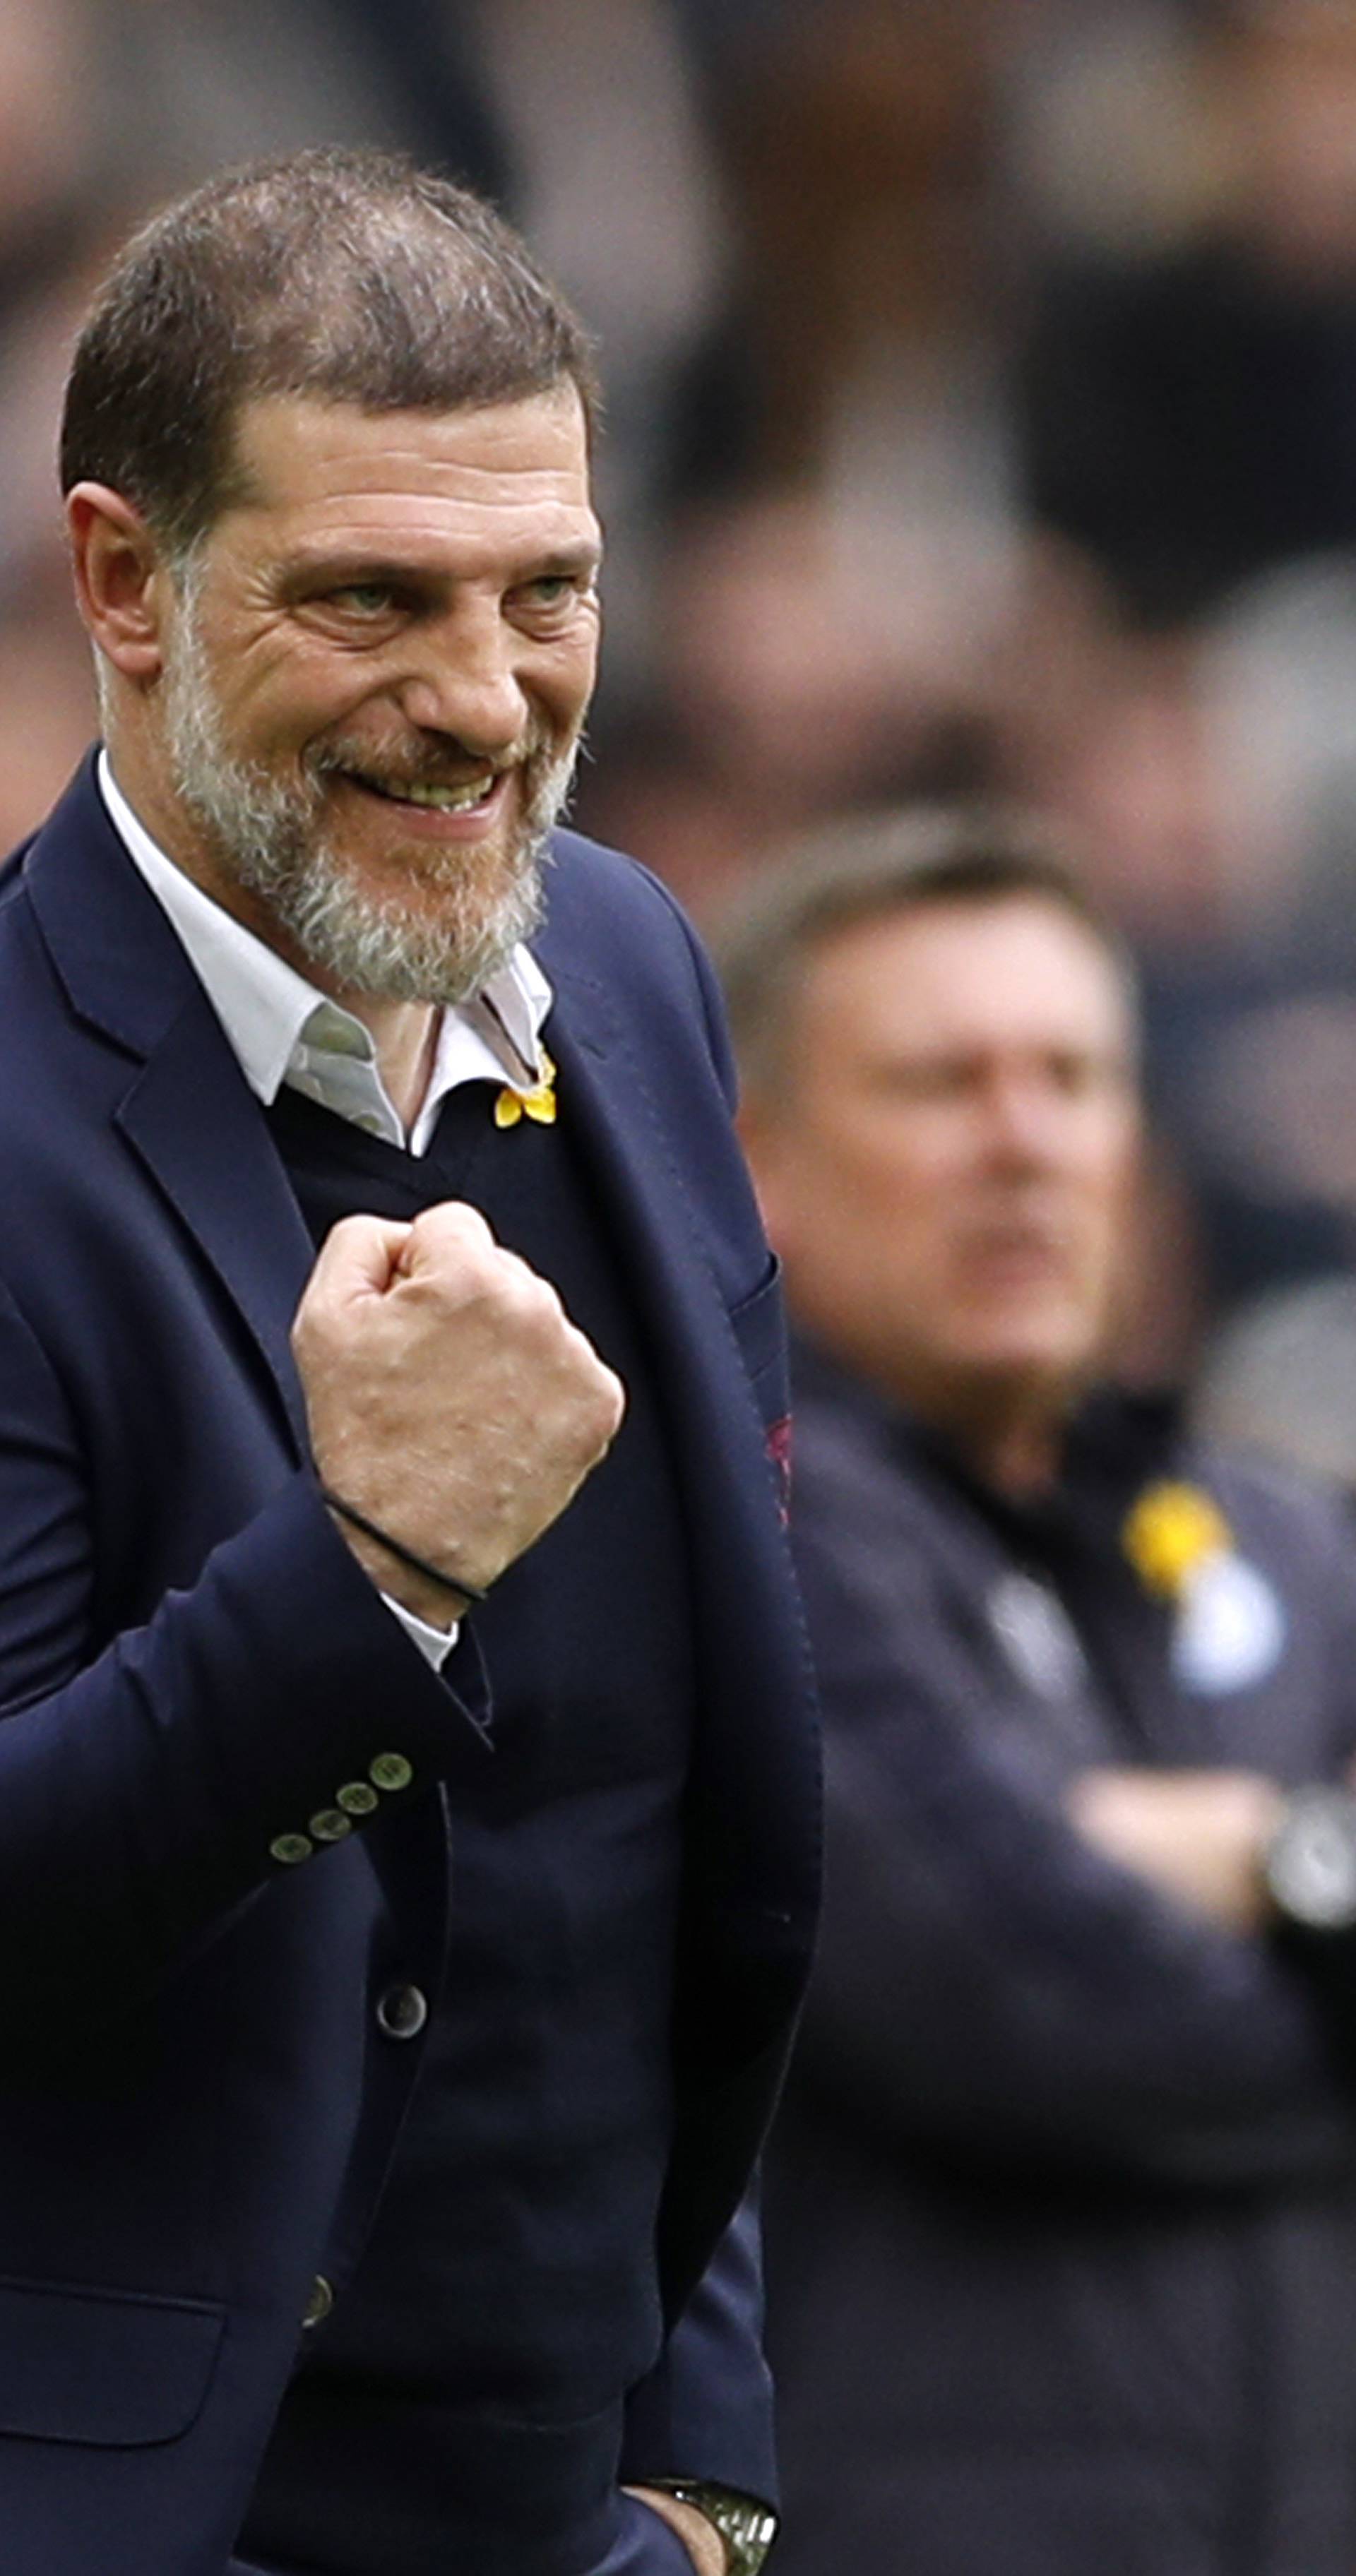 West Ham United manager Slaven Bilic celebrates after they score their first goal